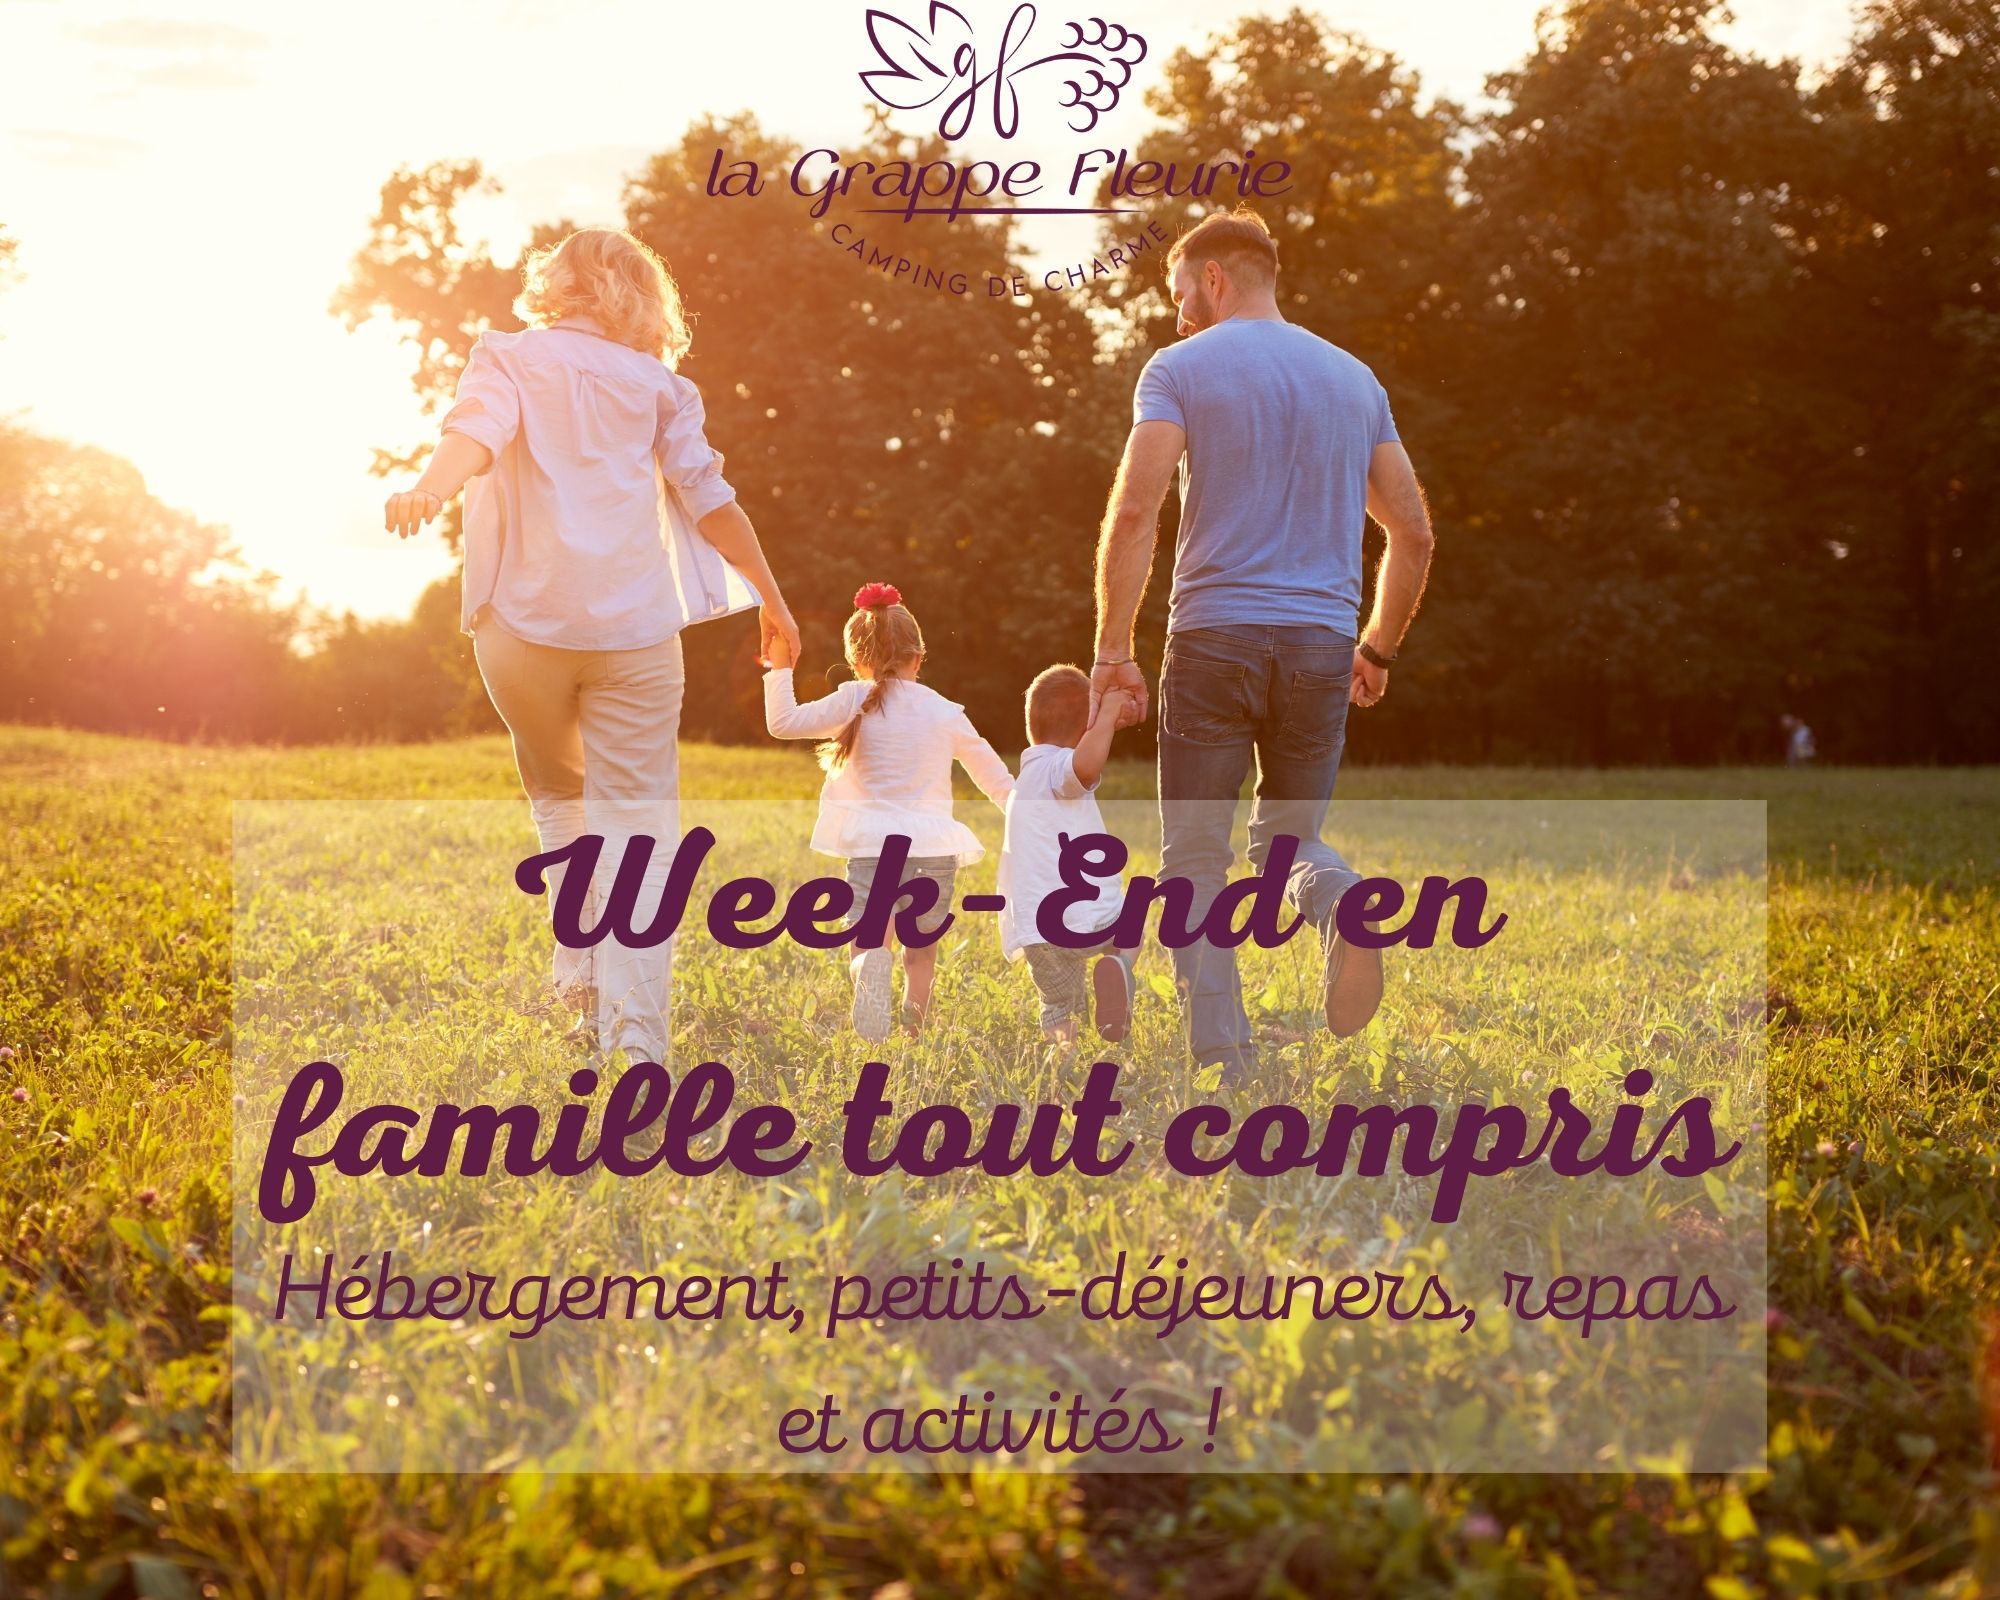 Huuraccommodatie - All-Inclusive Familie Weekend! - Camping La Grappe Fleurie